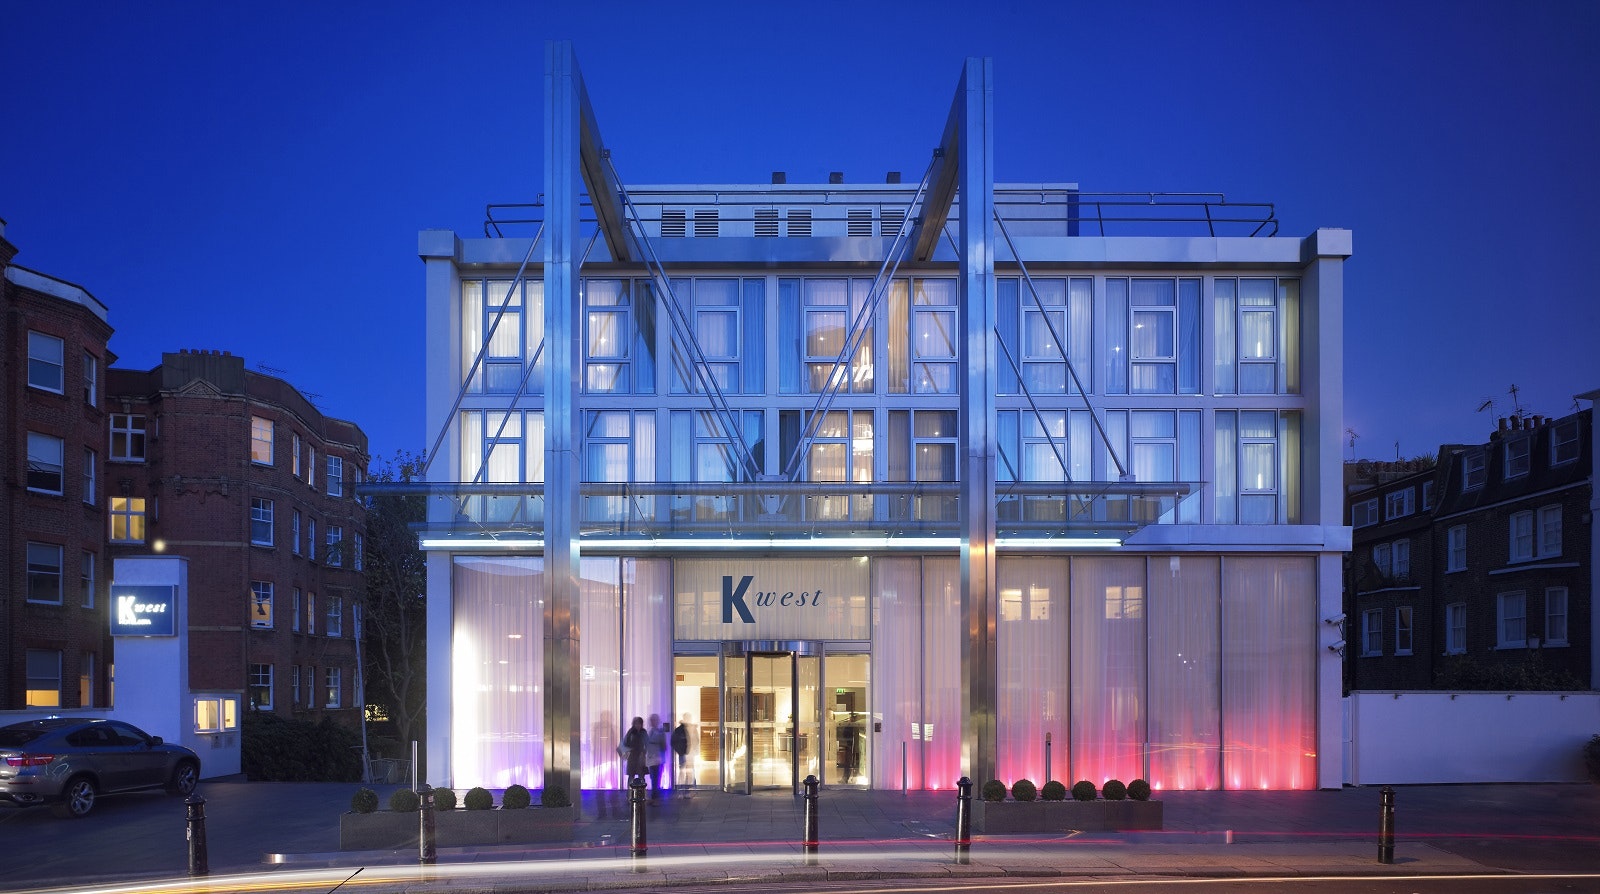 Hotel Conferences Venues in London - K West Hotel & Spa